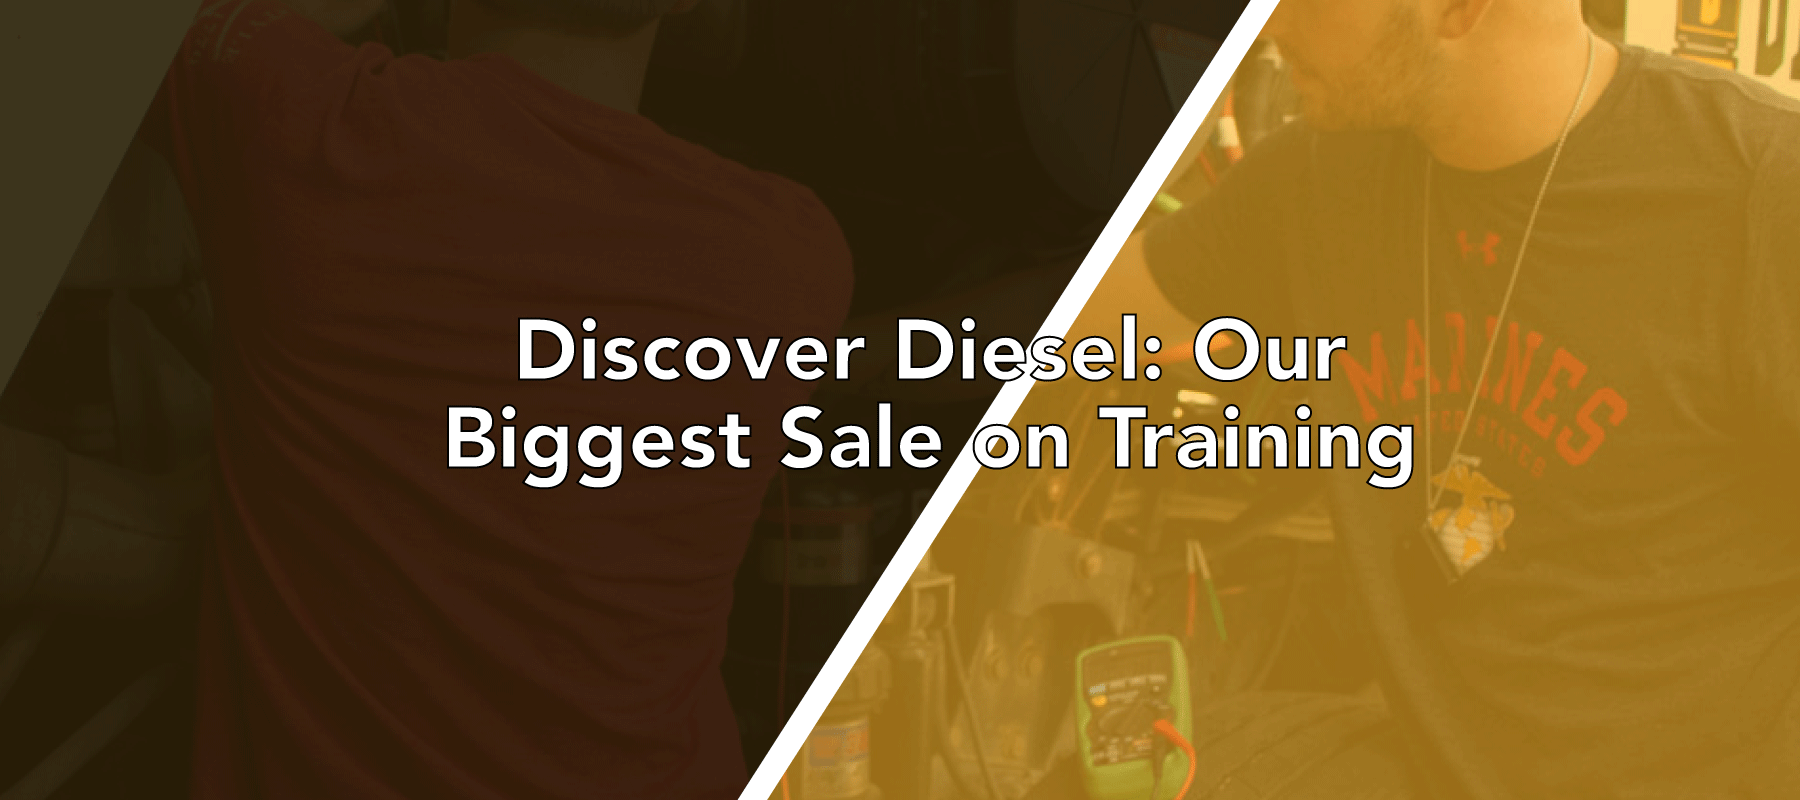 Our Biggest Annual Sale, Discover Diesel - 7 Ways to Save!